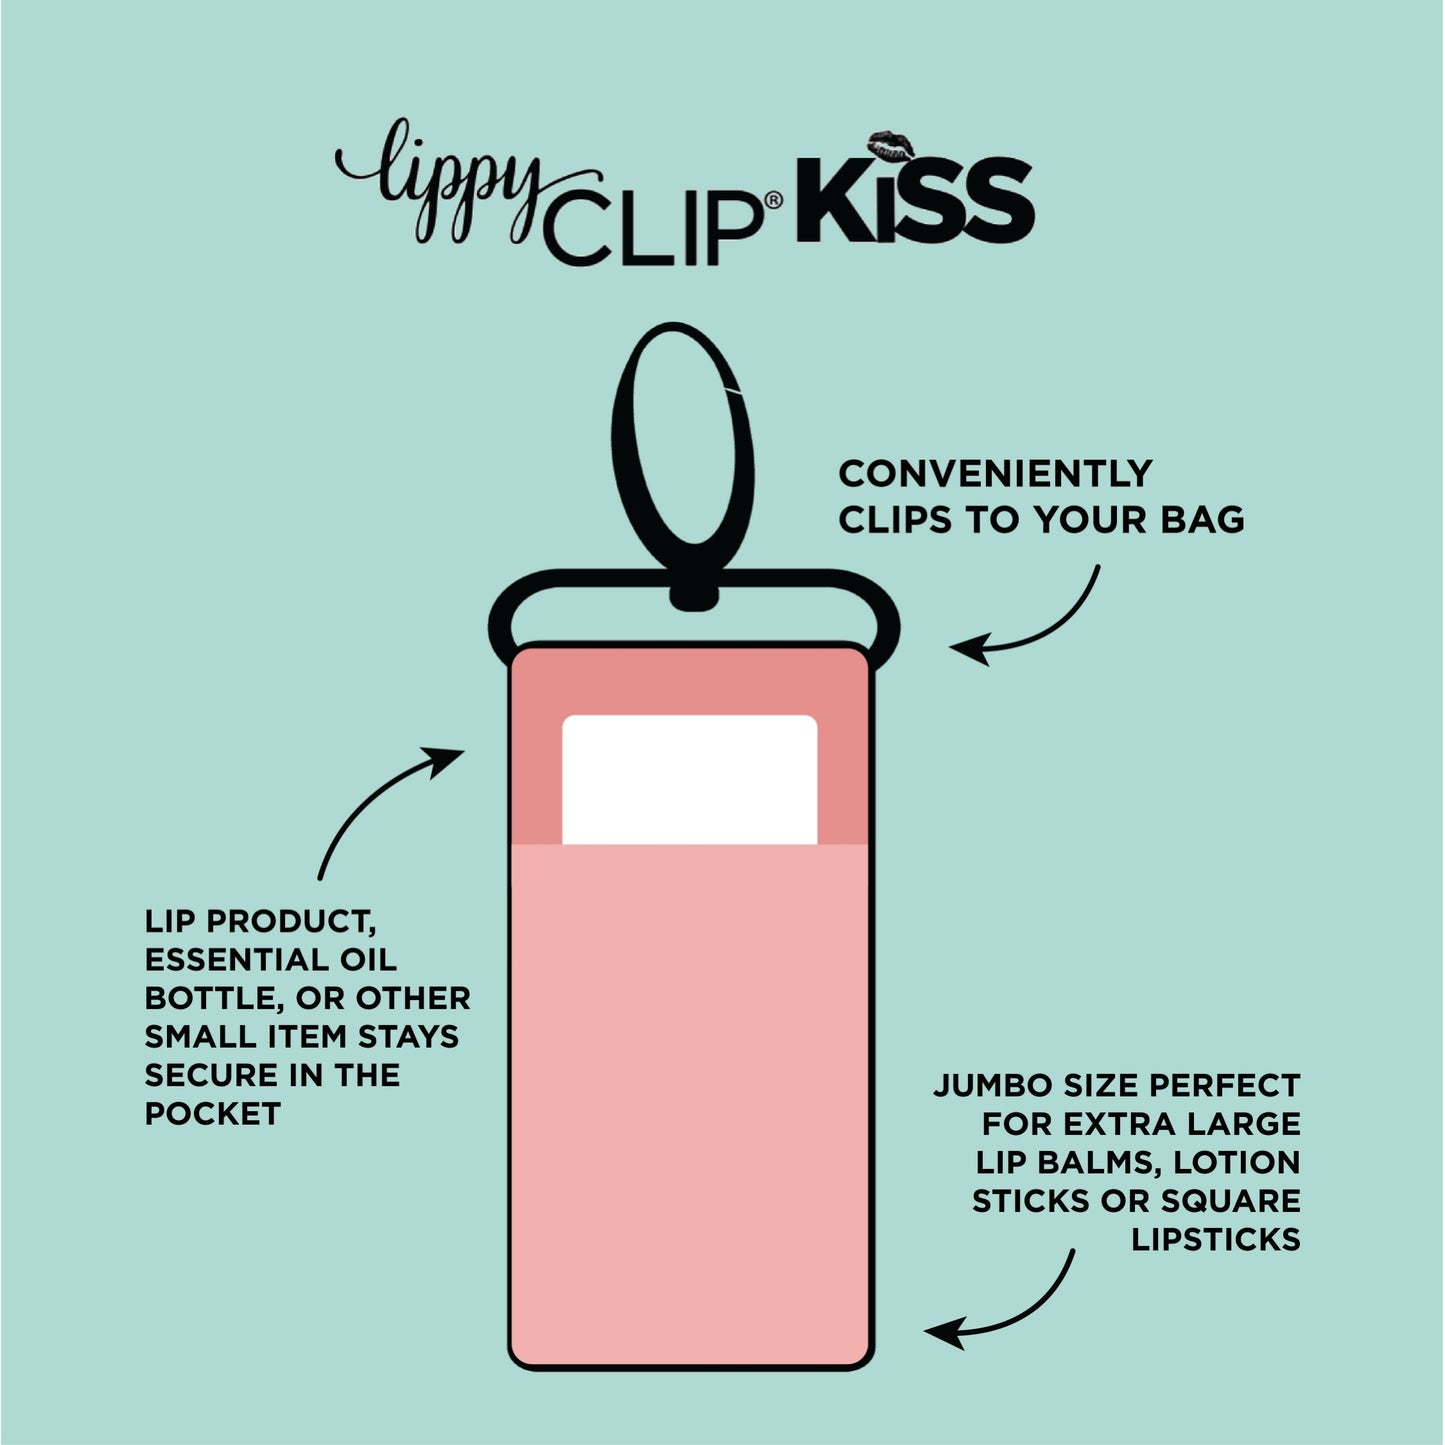 Buffalo Leopard LippyClipKISS for larger lip balms, essential oil rollers, and more - Discount Already Applied